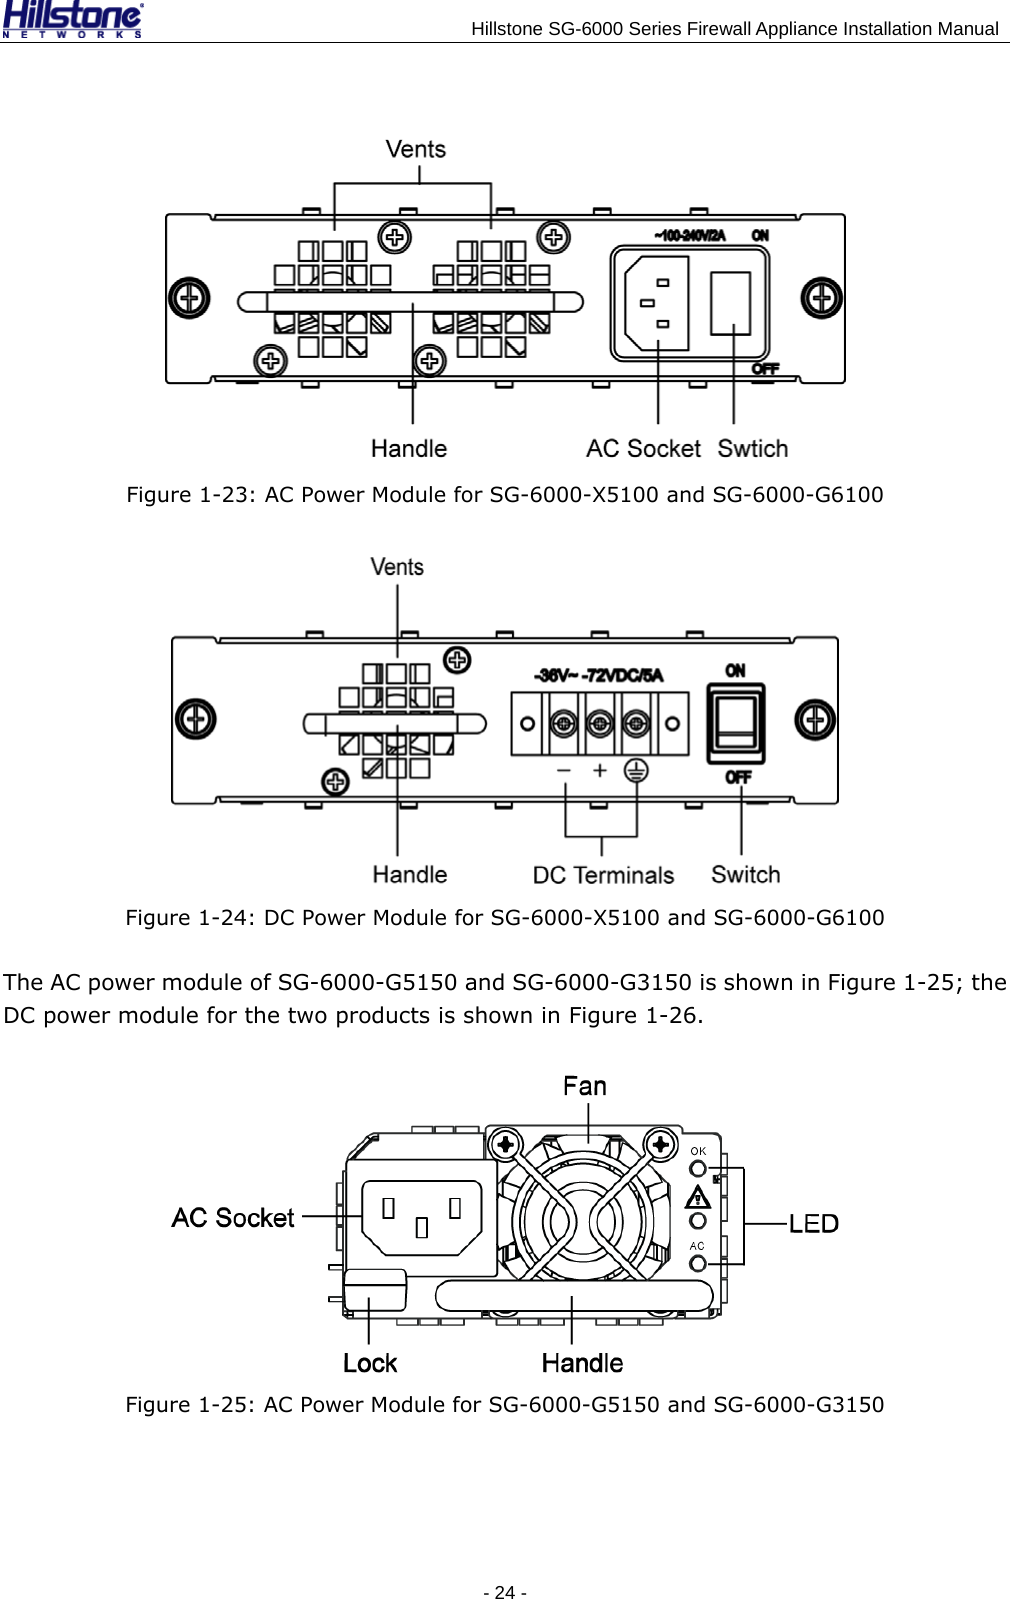                                    Hillstone SG-6000 Series Firewall Appliance Installation Manual  Figure 1-23: AC Power Module for SG-6000-X5100 and SG-6000-G6100  Figure 1-24: DC Power Module for SG-6000-X5100 and SG-6000-G6100 The AC power module of SG-6000-G5150 and SG-6000-G3150 is shown in Figure 1-25; the DC power module for the two products is shown in Figure 1-26.  Figure 1-25: AC Power Module for SG-6000-G5150 and SG-6000-G3150 - 24 -  